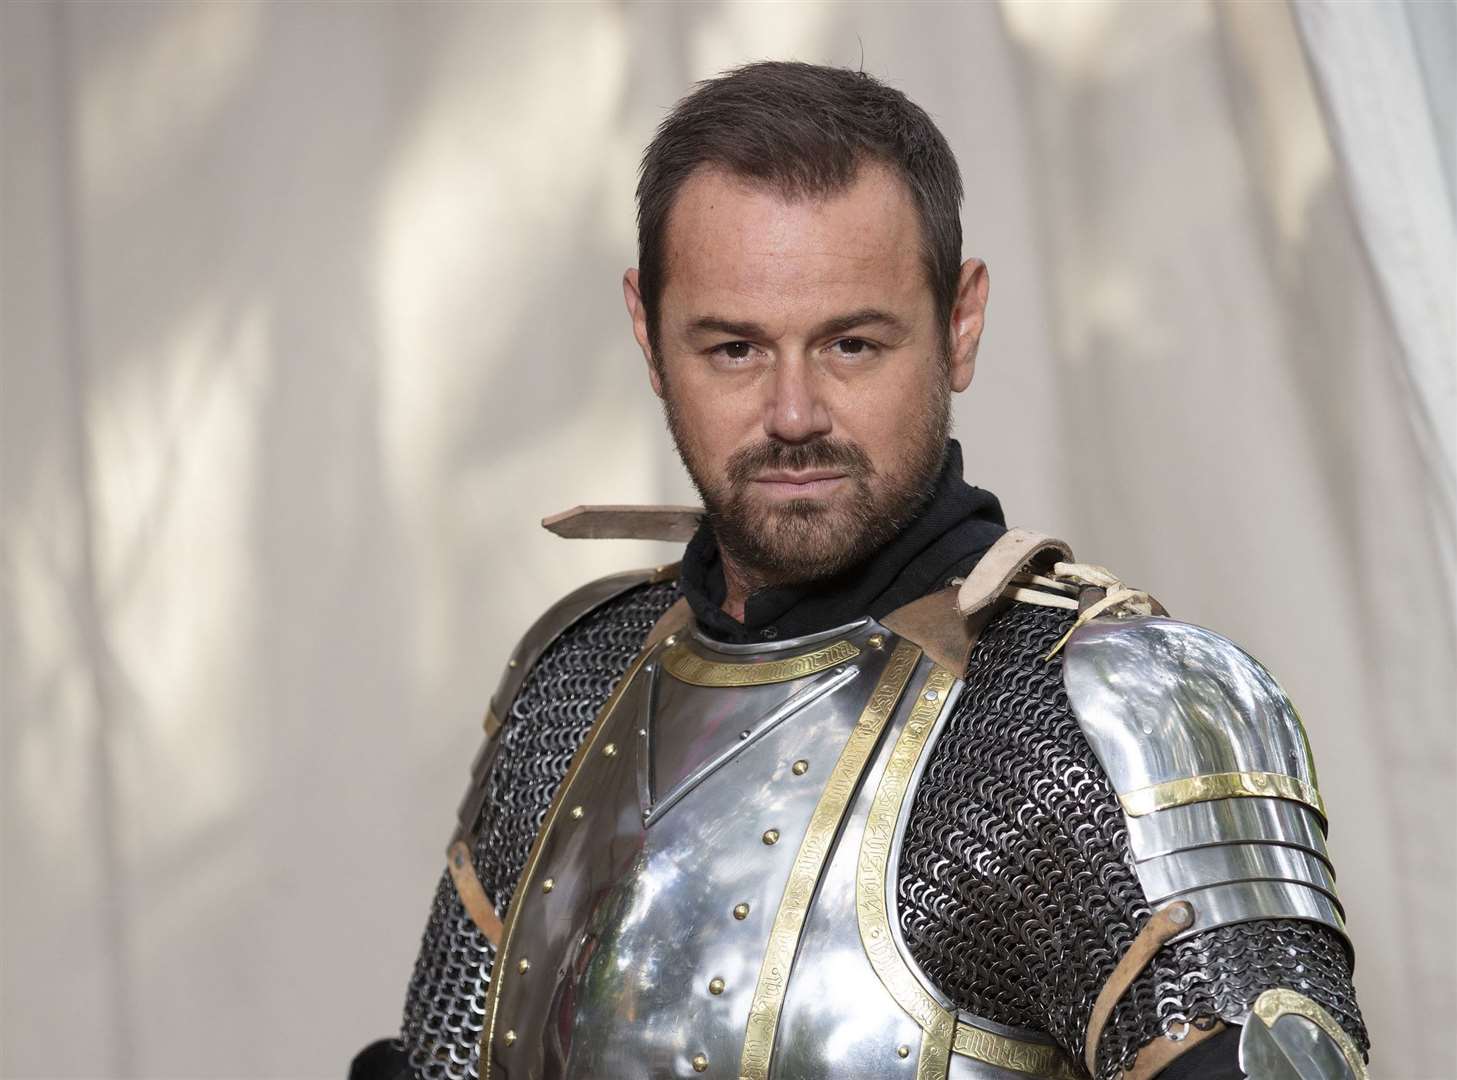 The actor in medieval armour for his appearance on BBC One's Danny Dyer's Right Royal Family.